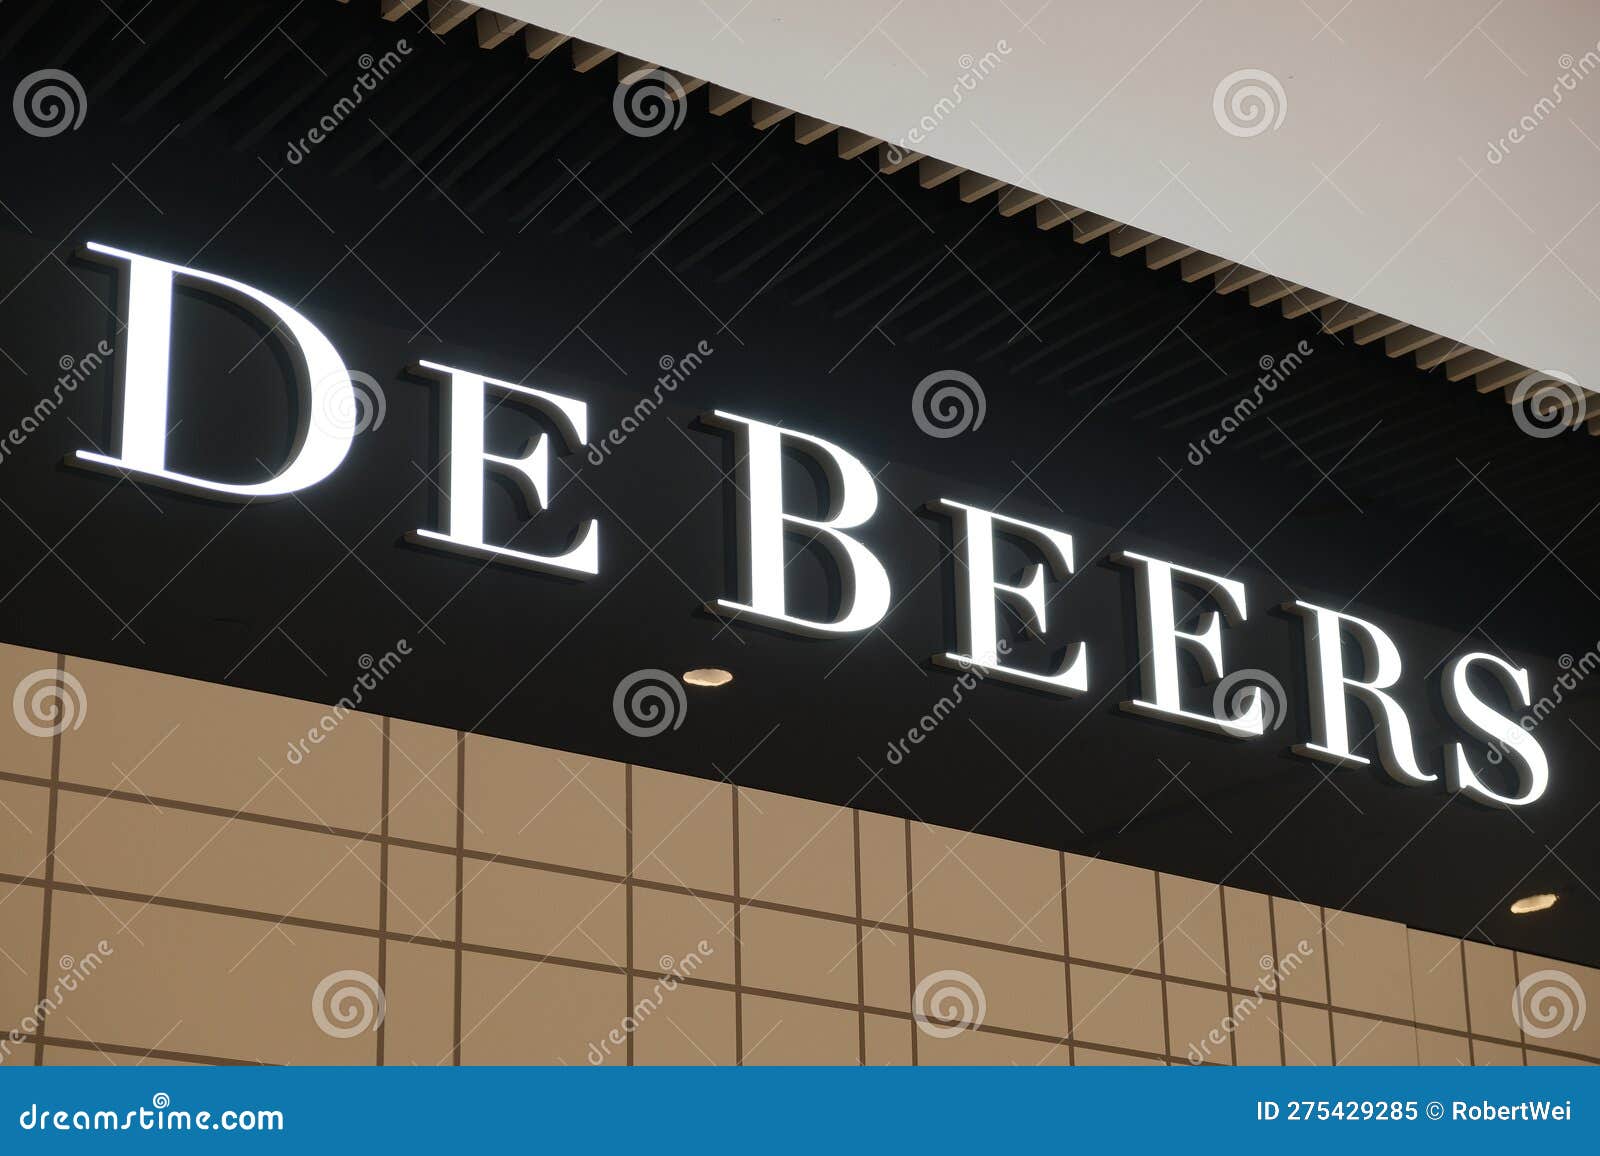 Close Up De Beers Store Brand Logo Editorial Image - Image of